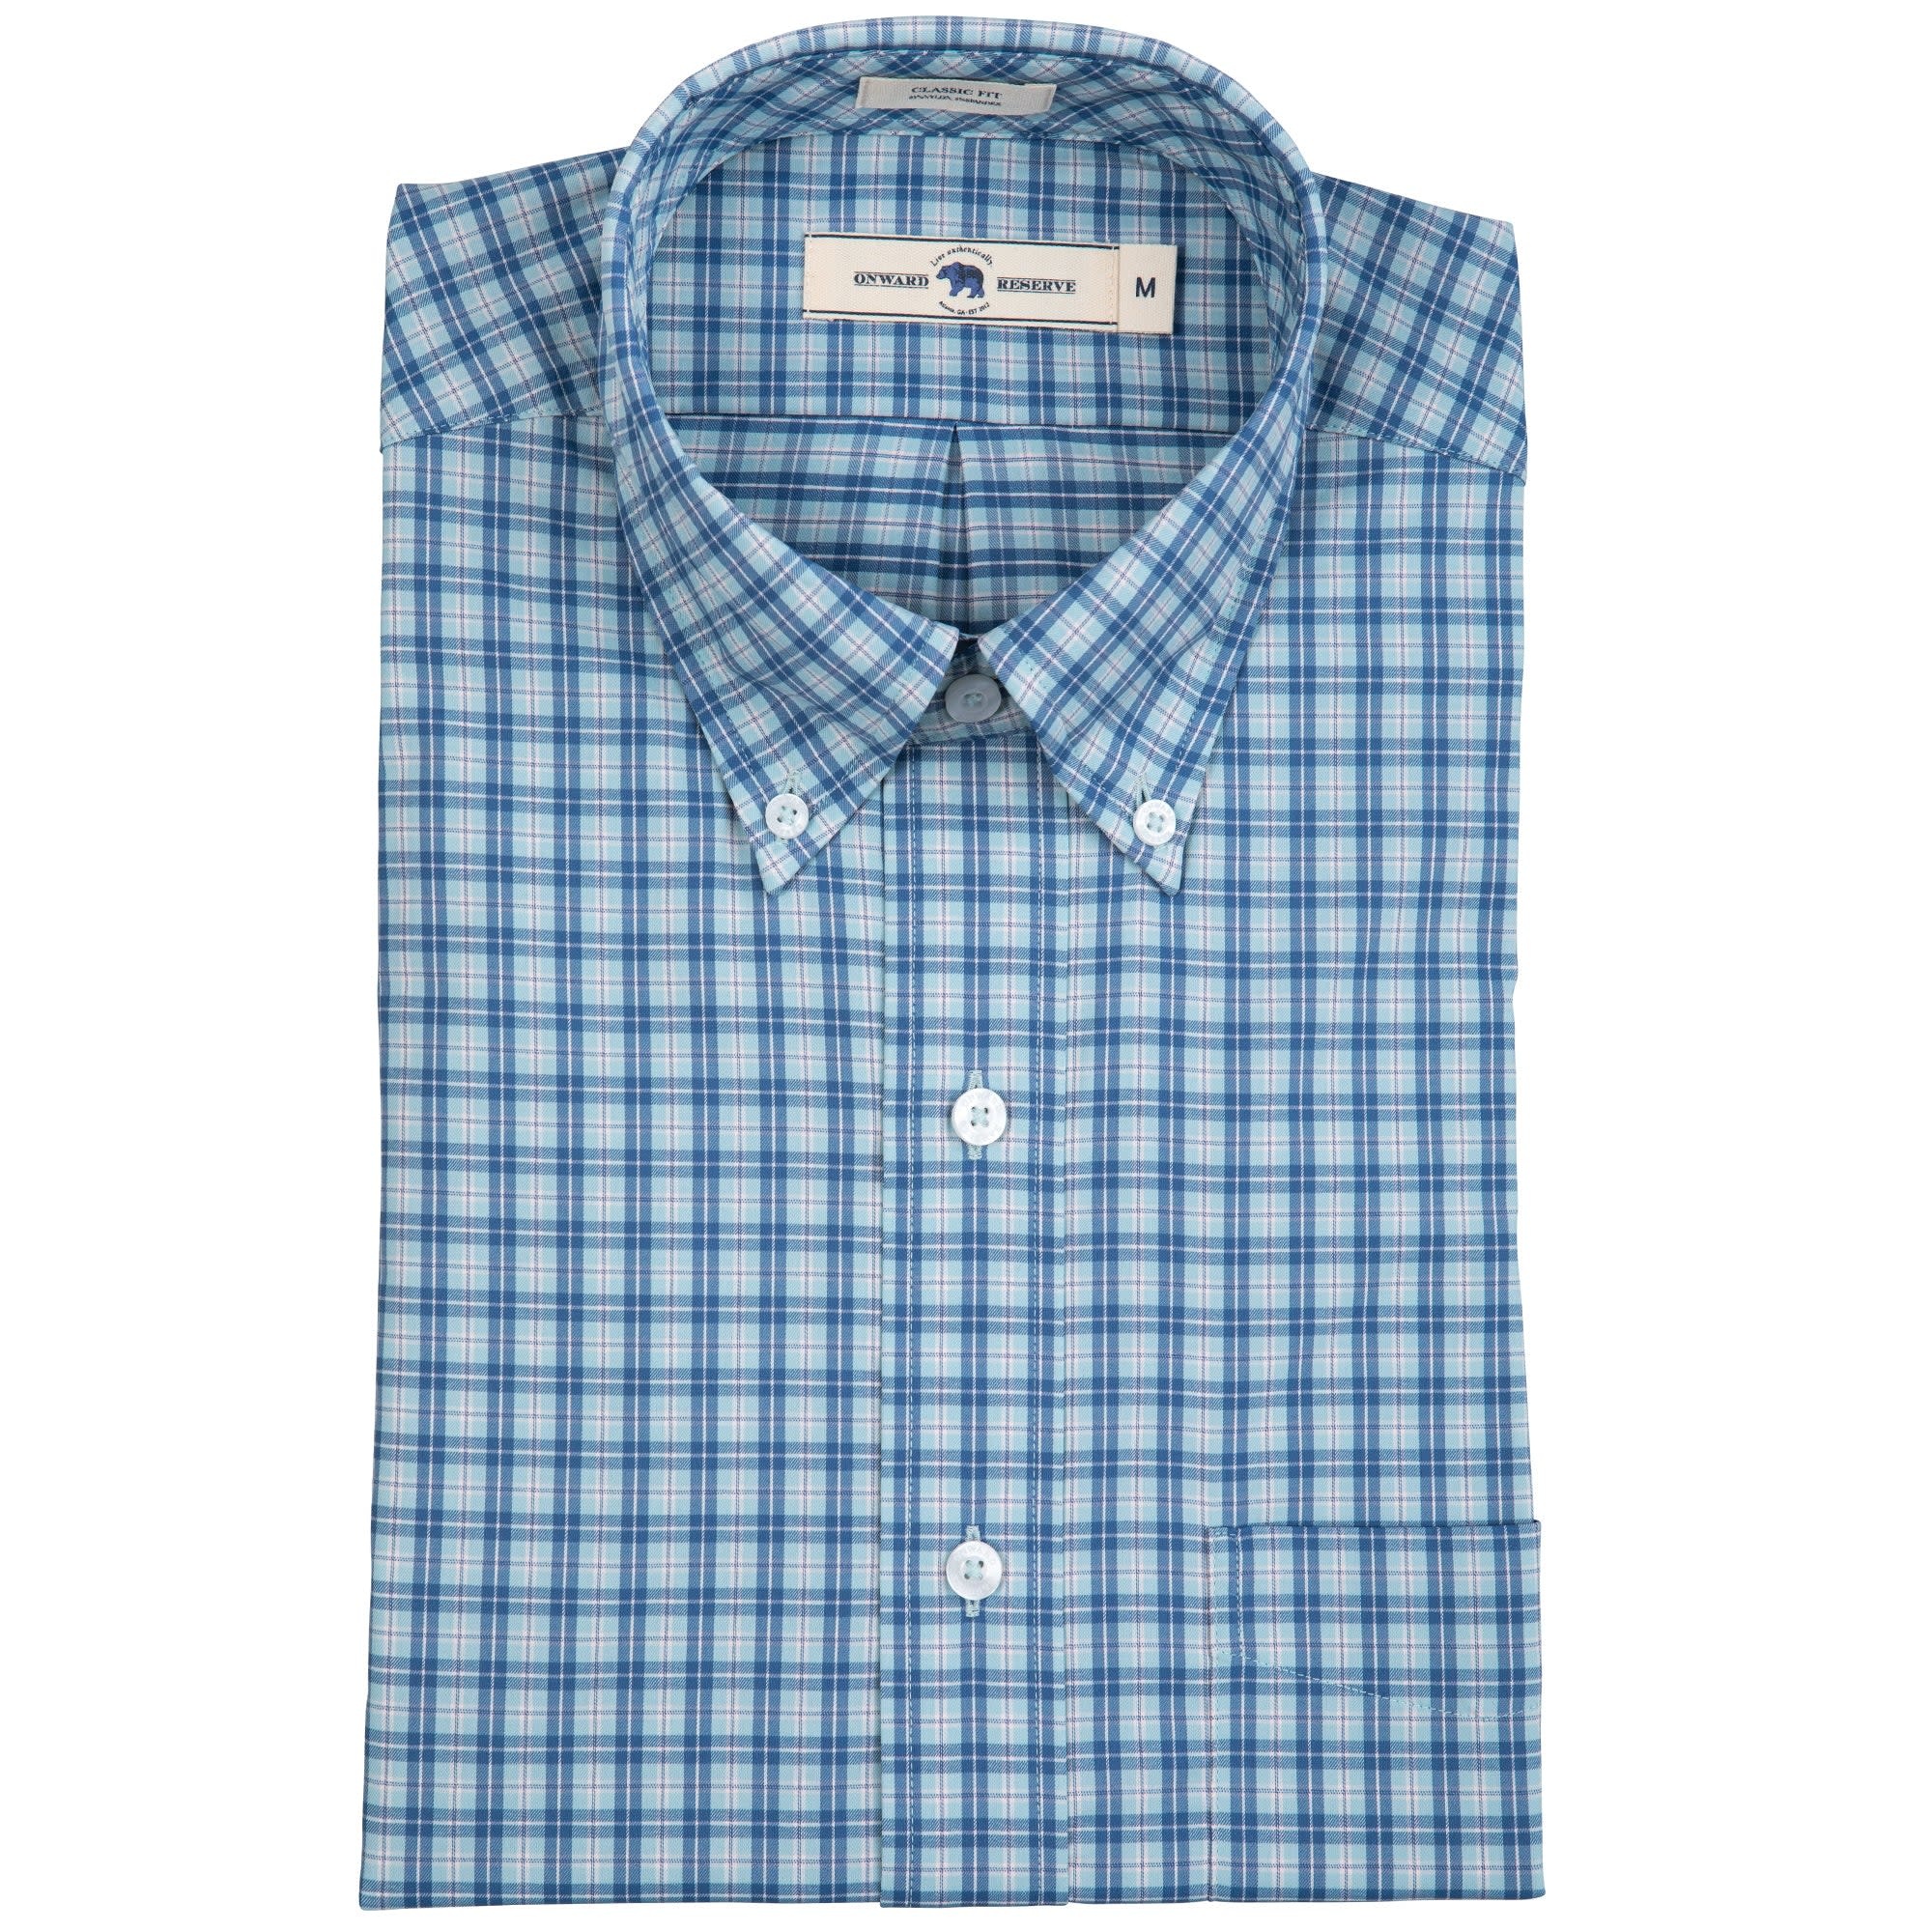 Onward Reserve Classic Fit Performance Button Down Shirt - Abraham's